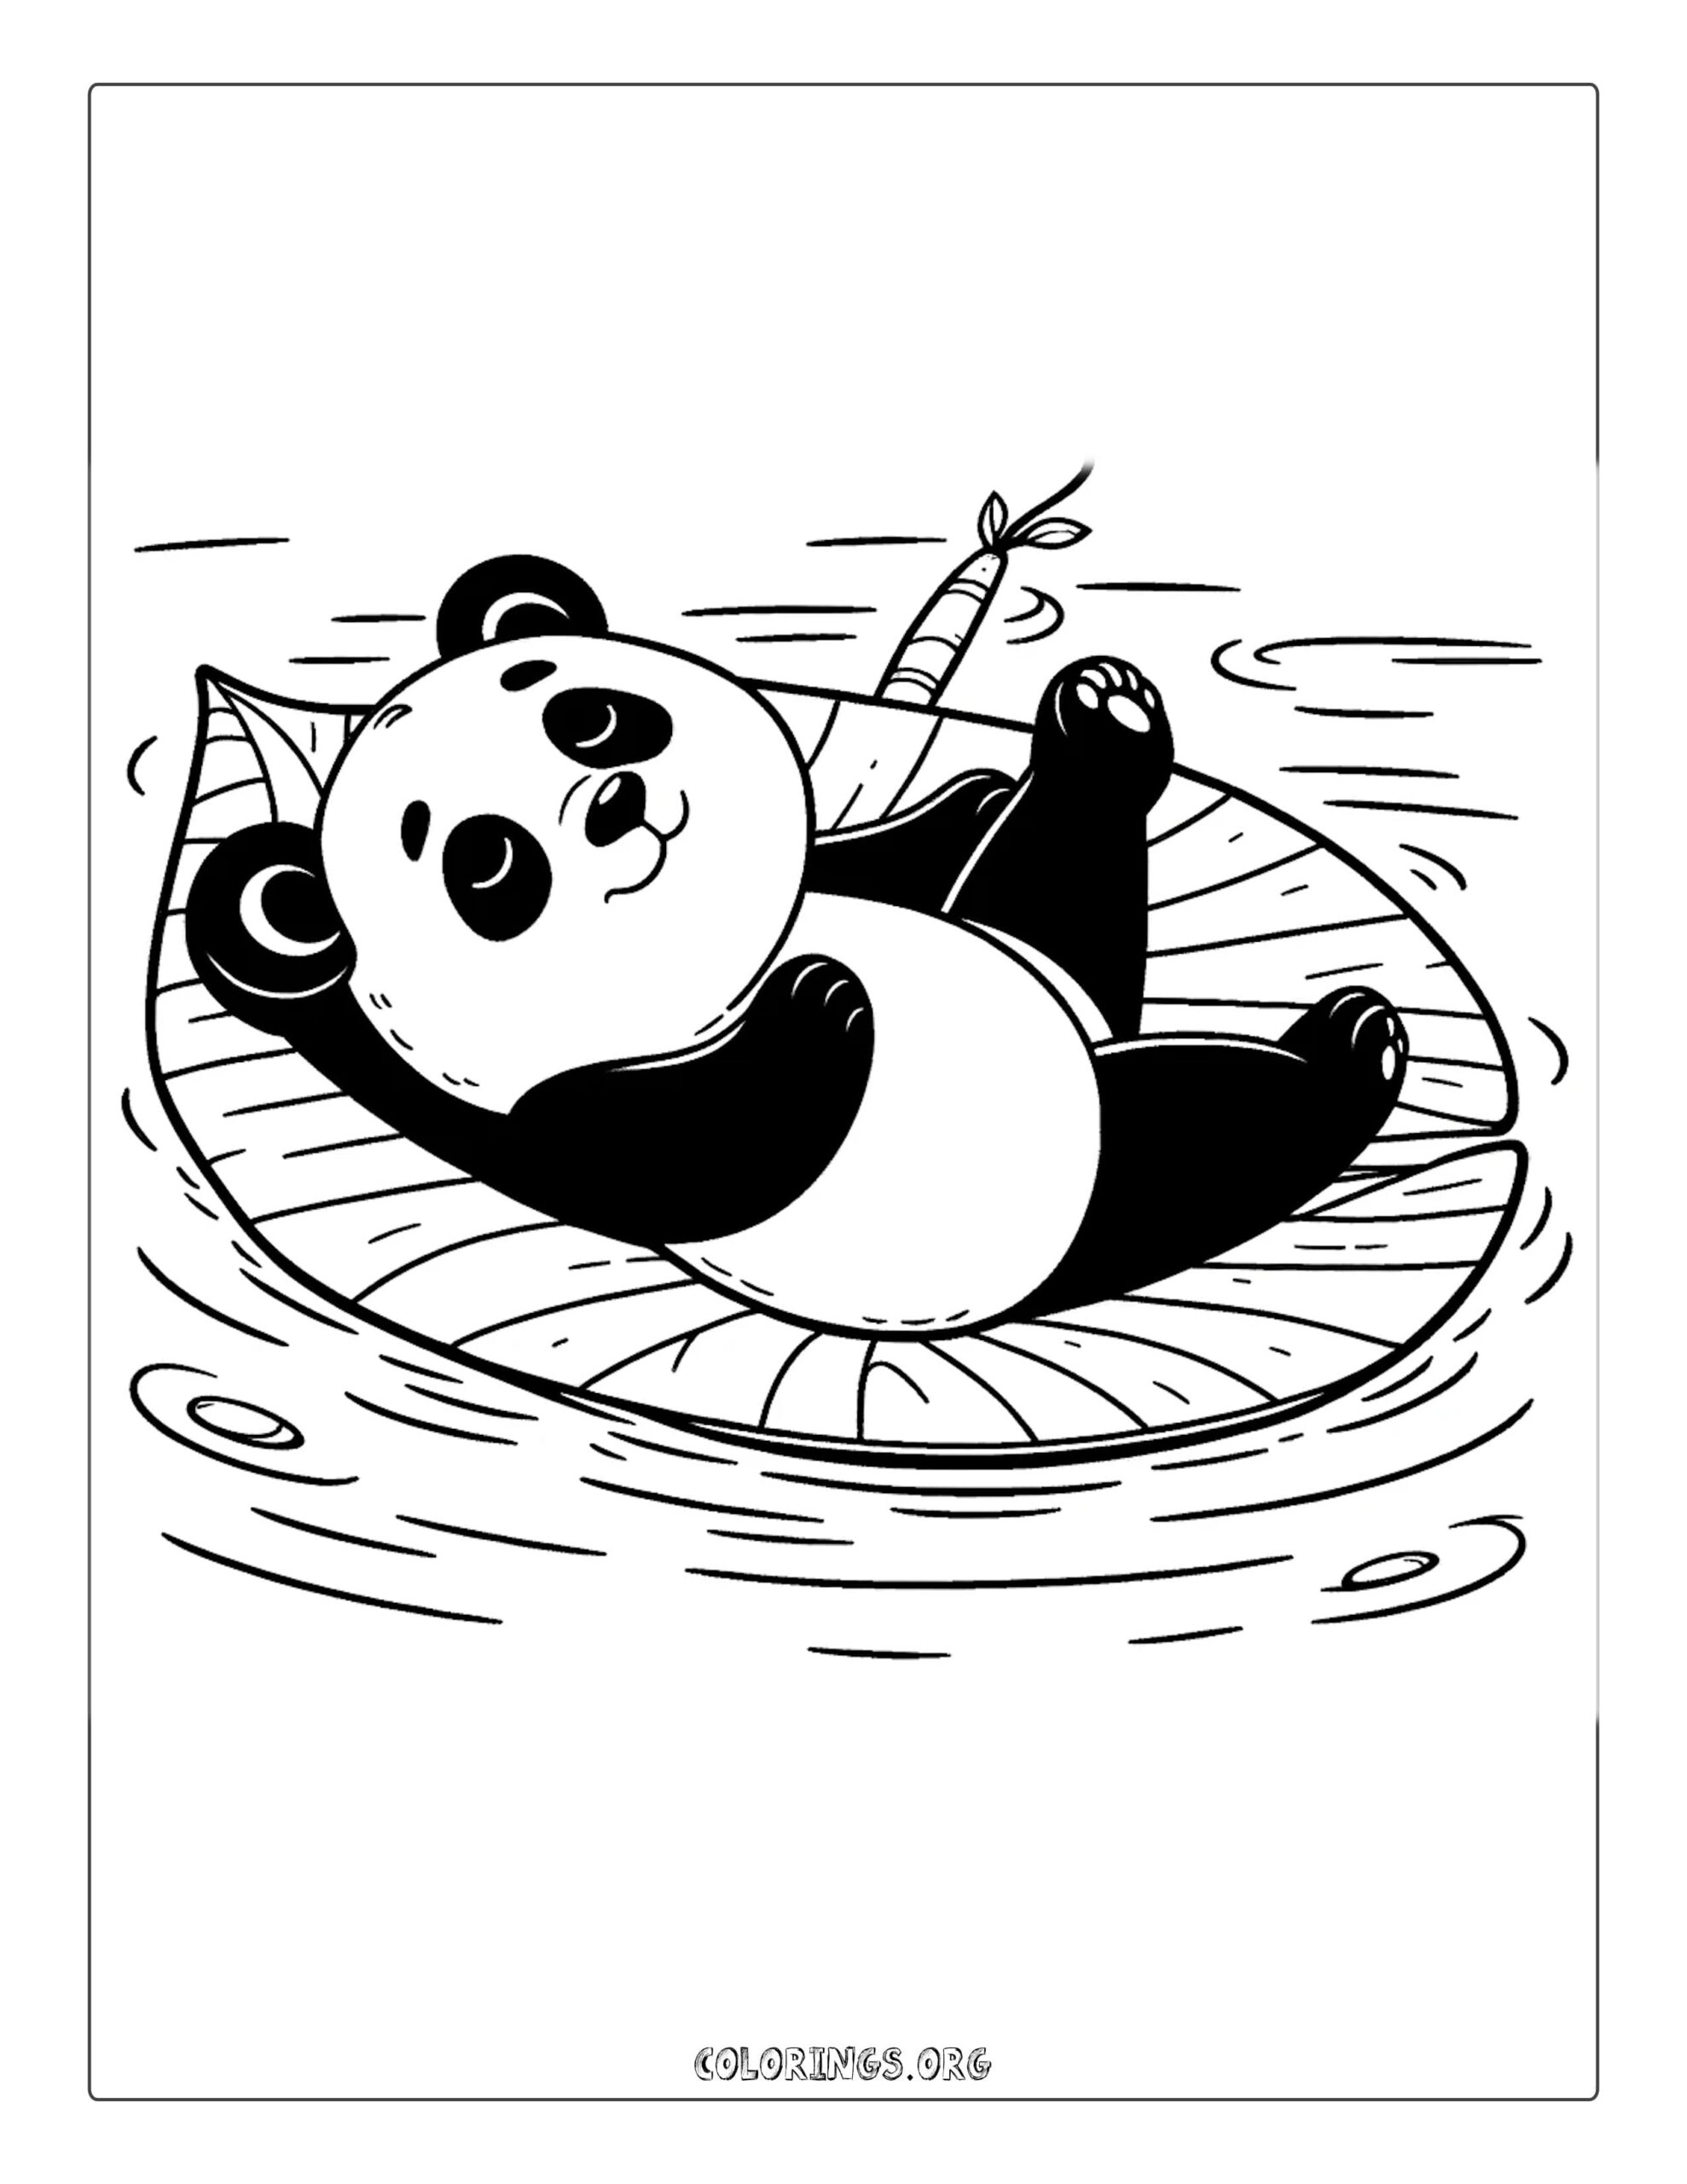 Relaxed Panda on Lake Coloring Page